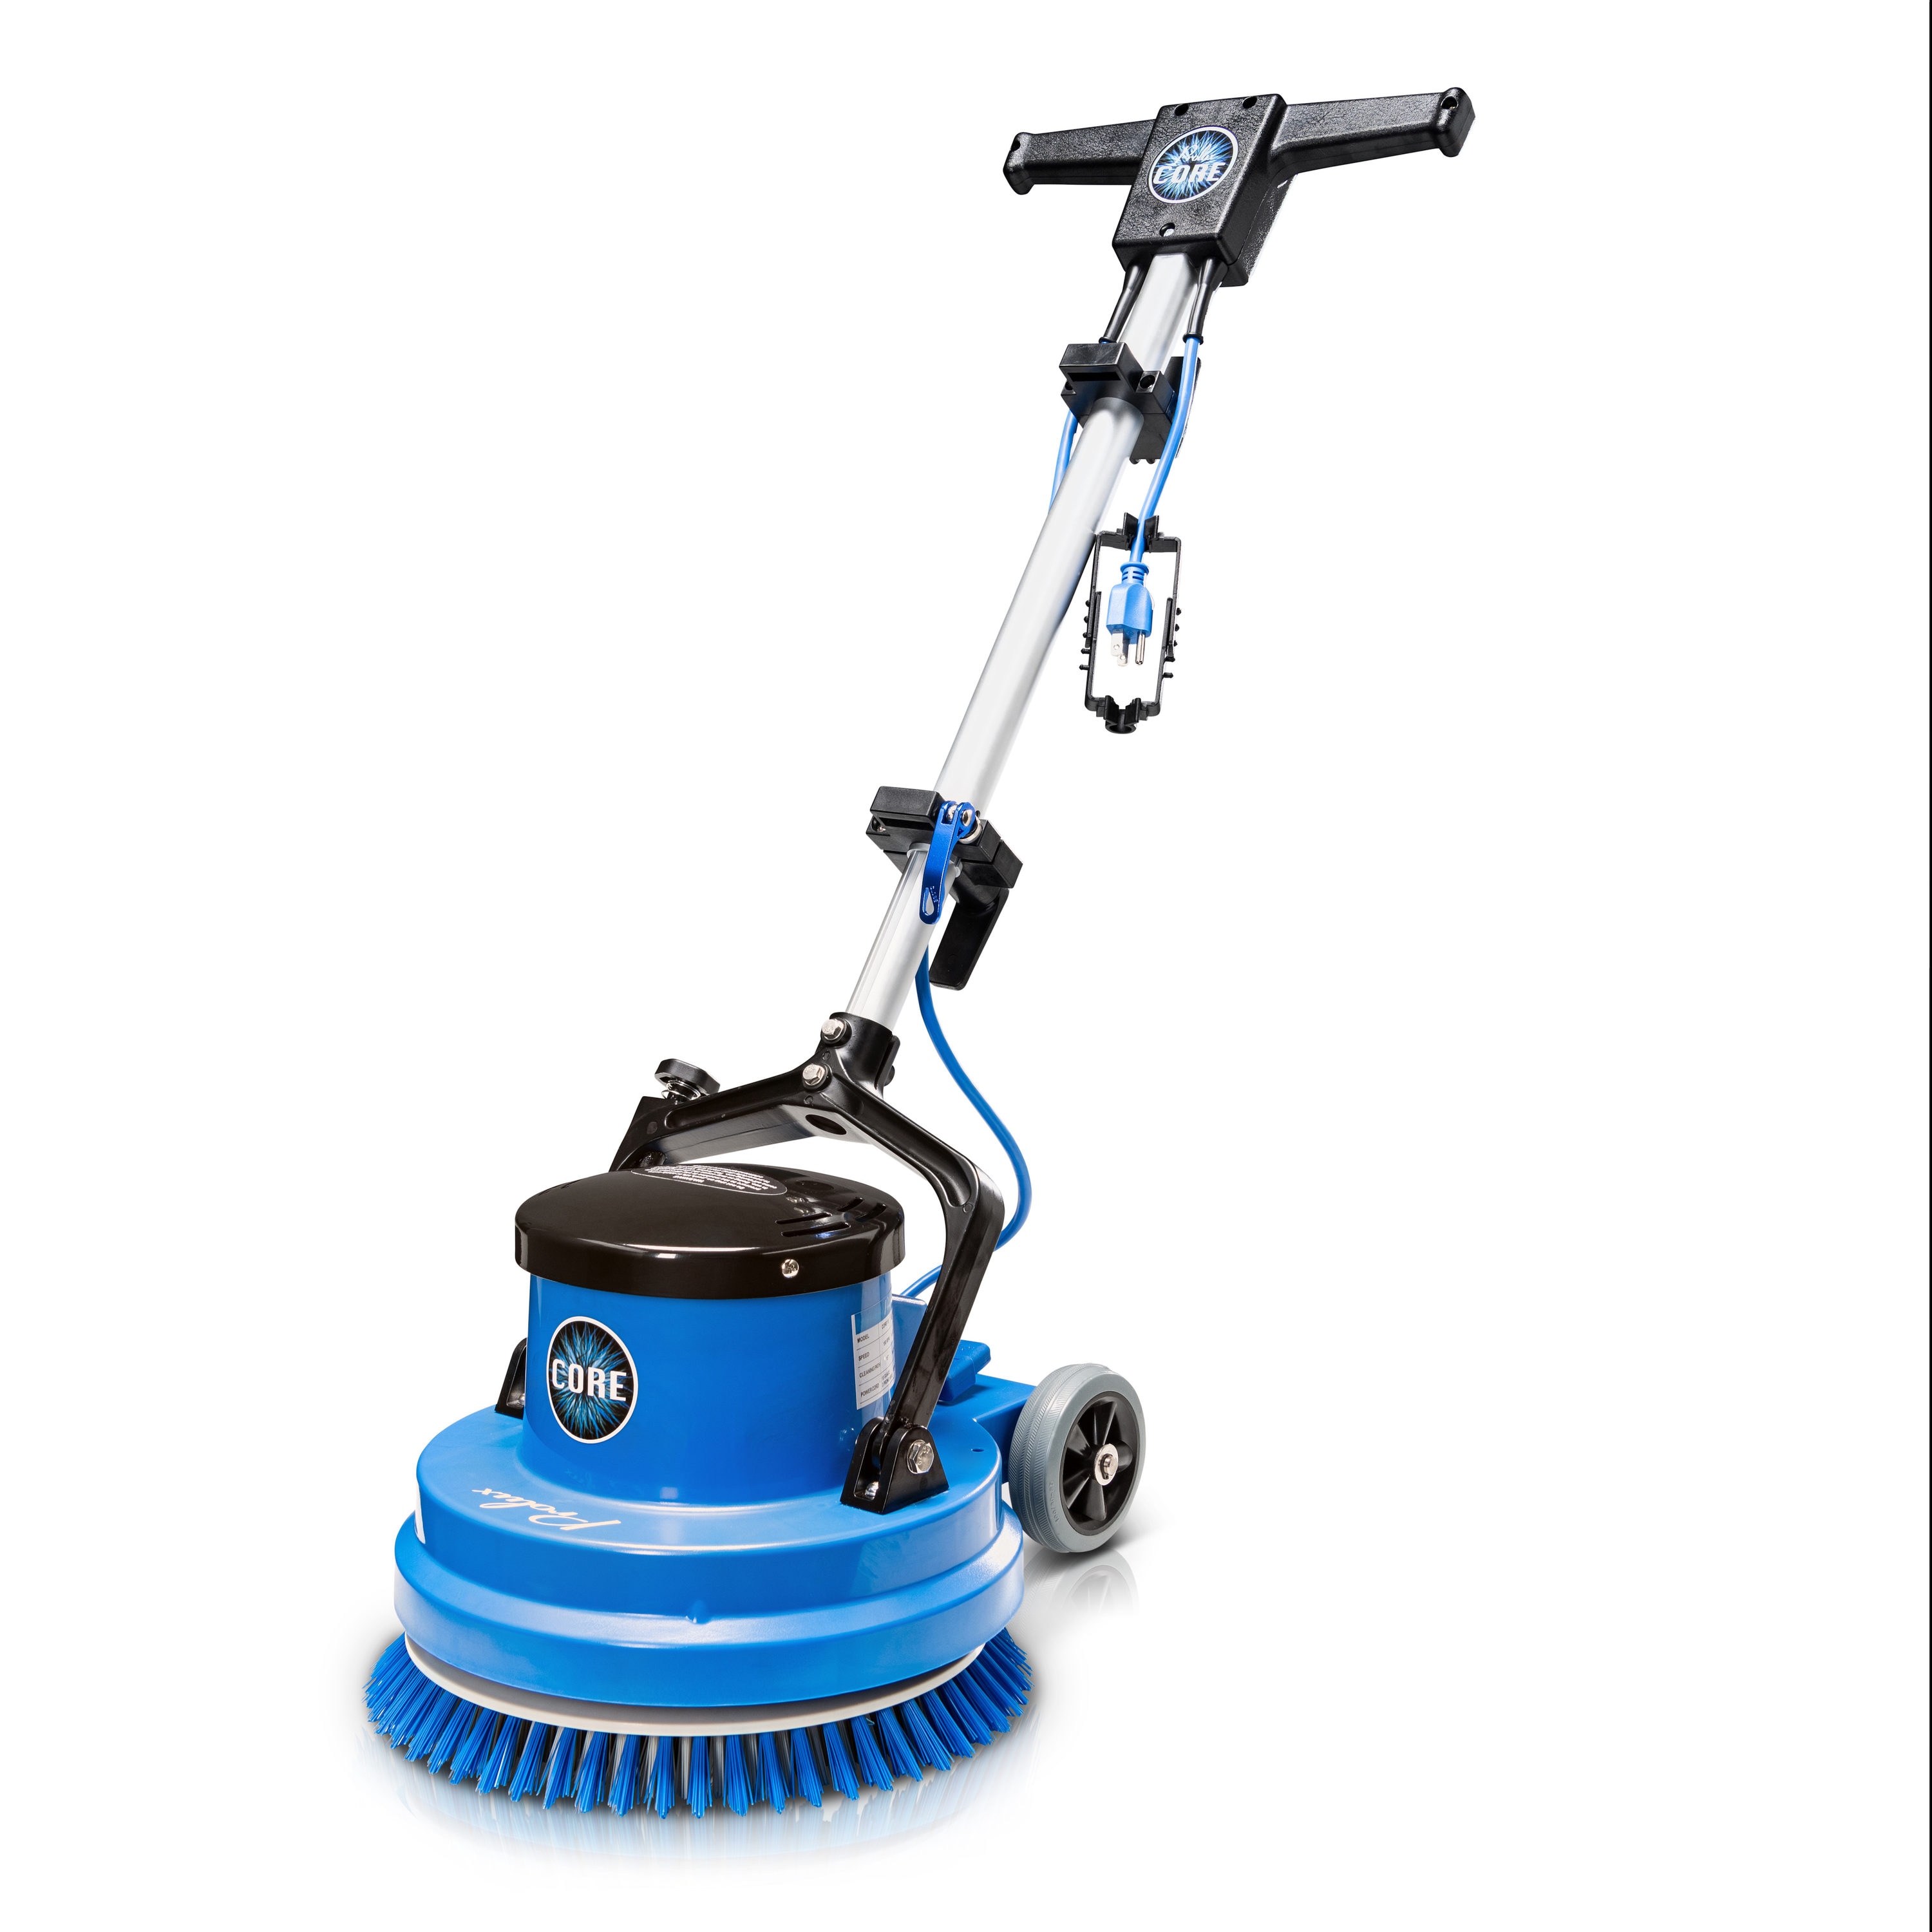 Professional Grout Cleaning Machines in Newnan